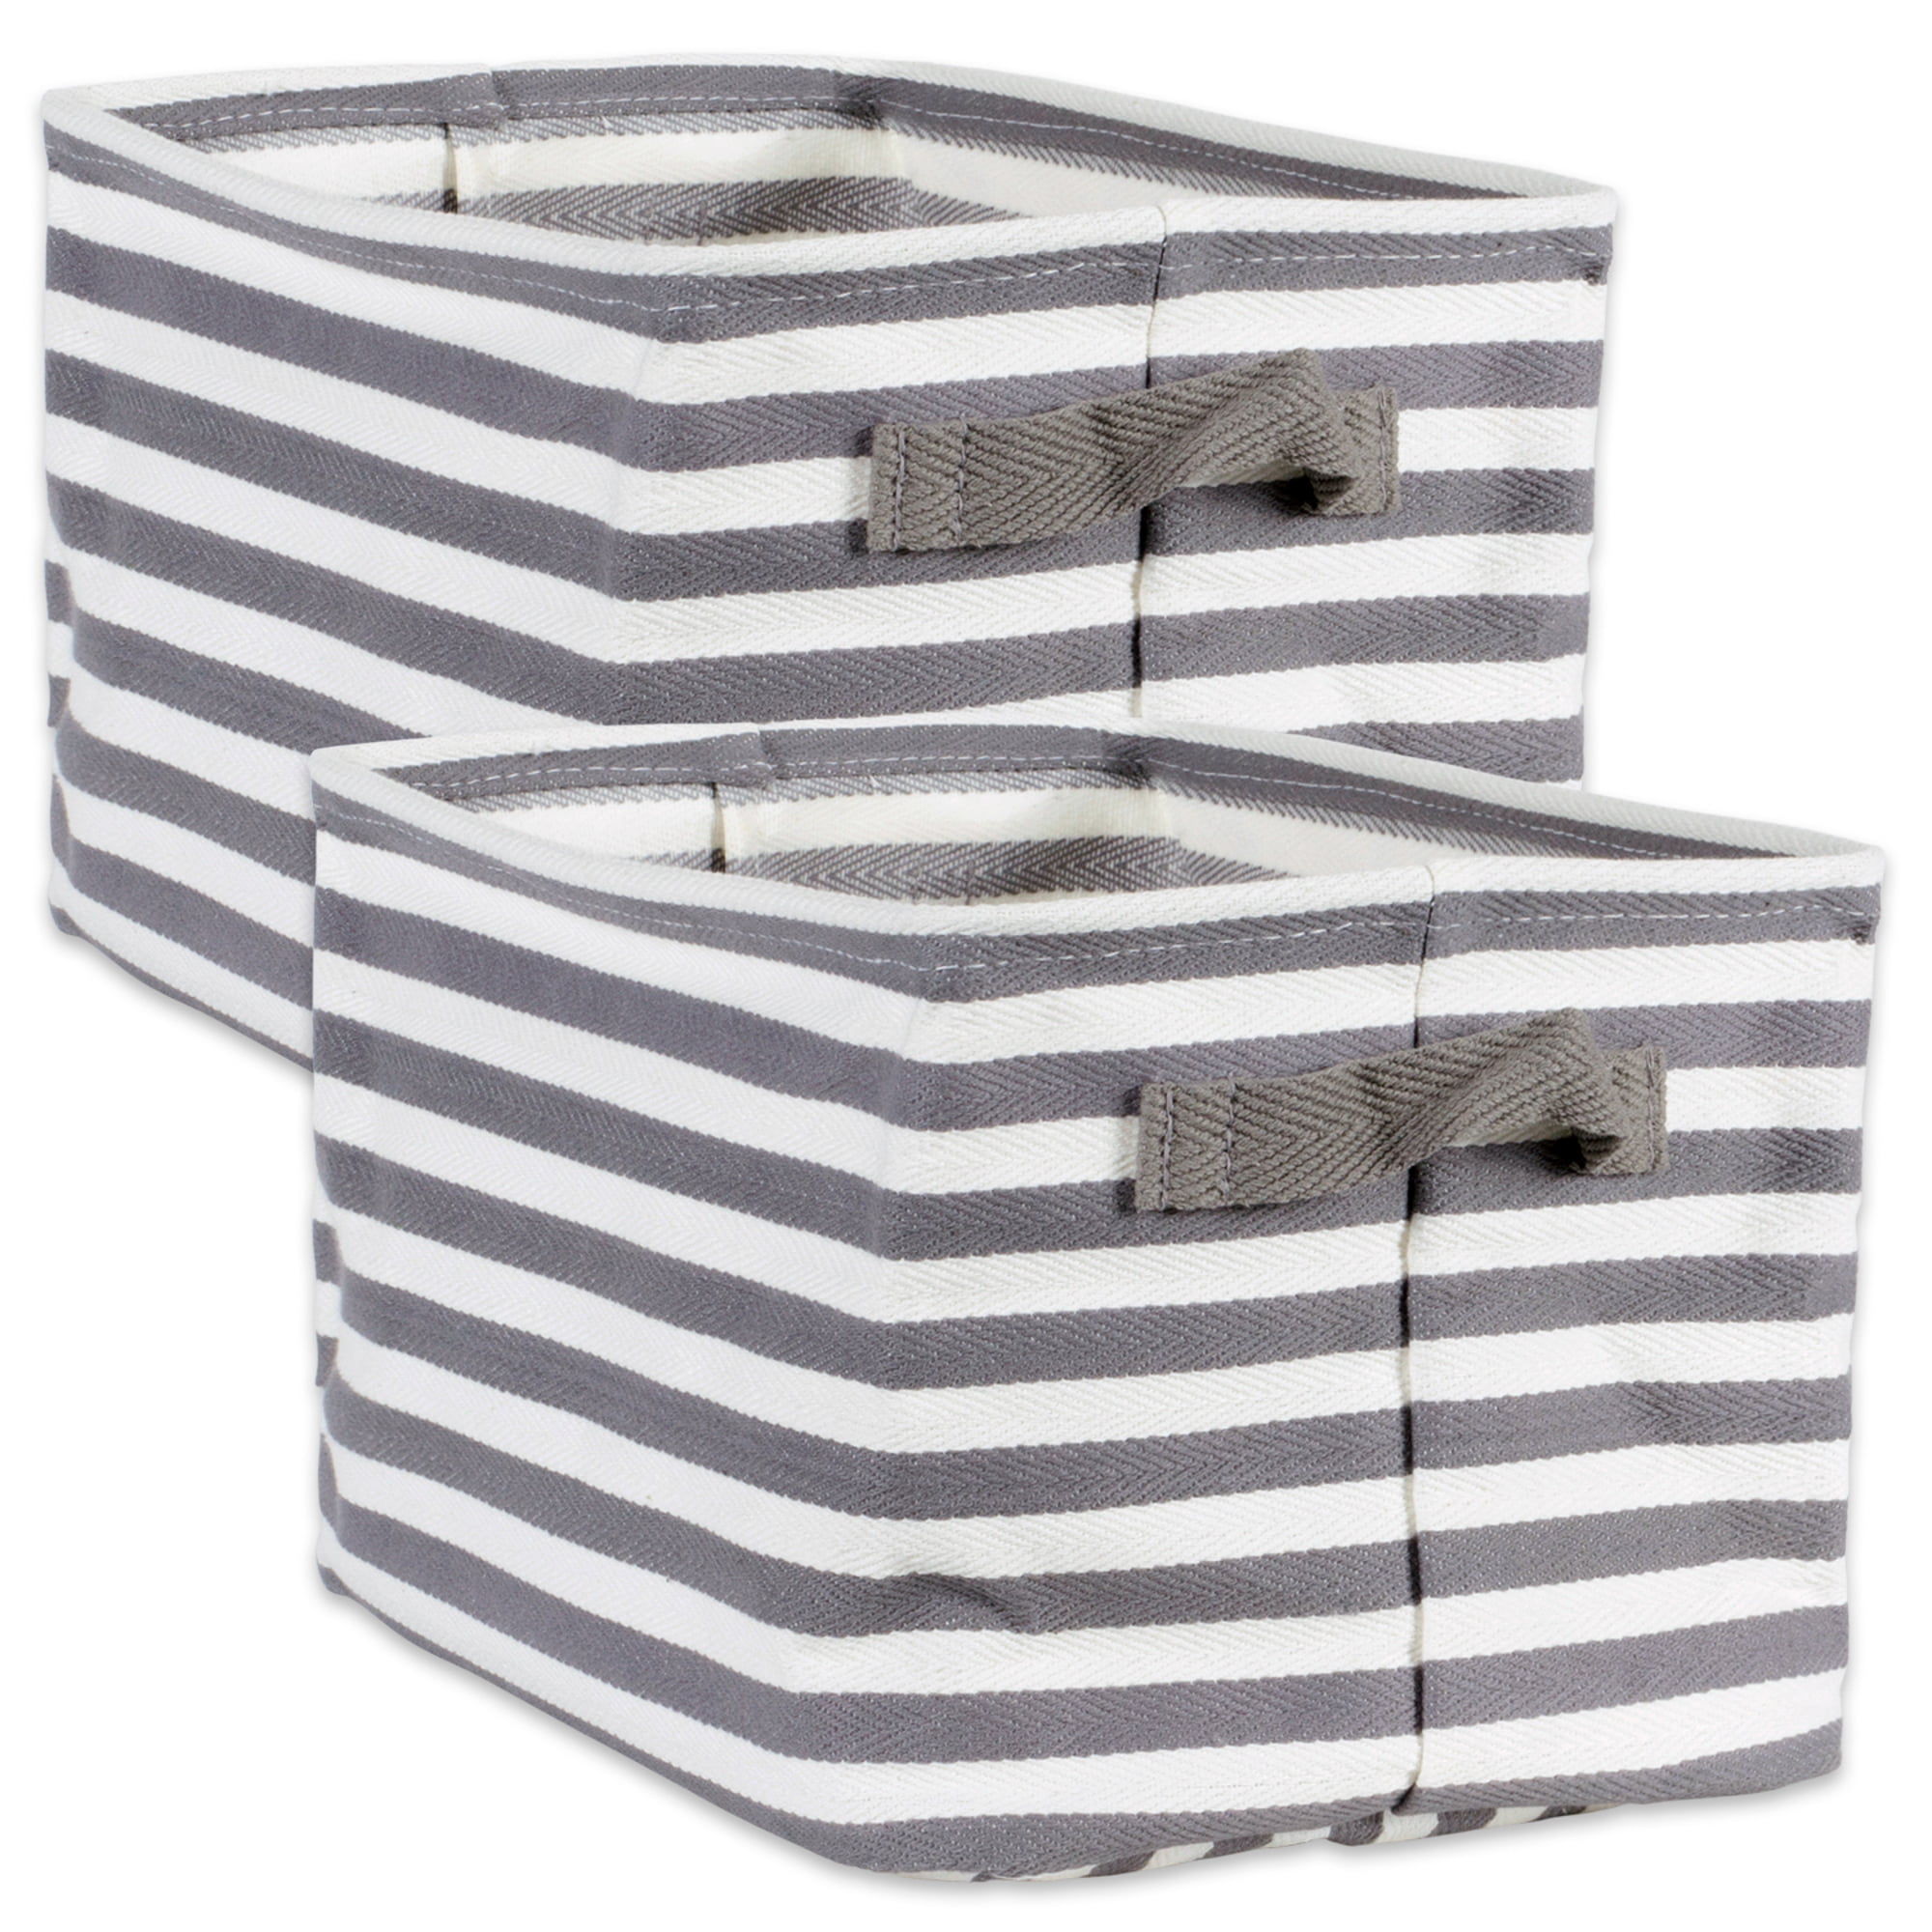 Closet 14 x 14 x 20 DII Cotton/Polyester Round Laundry Hamper or Basket Nursey Gray Rugby Stripe Perfect in Your Bedroom Dorm Laundry Room